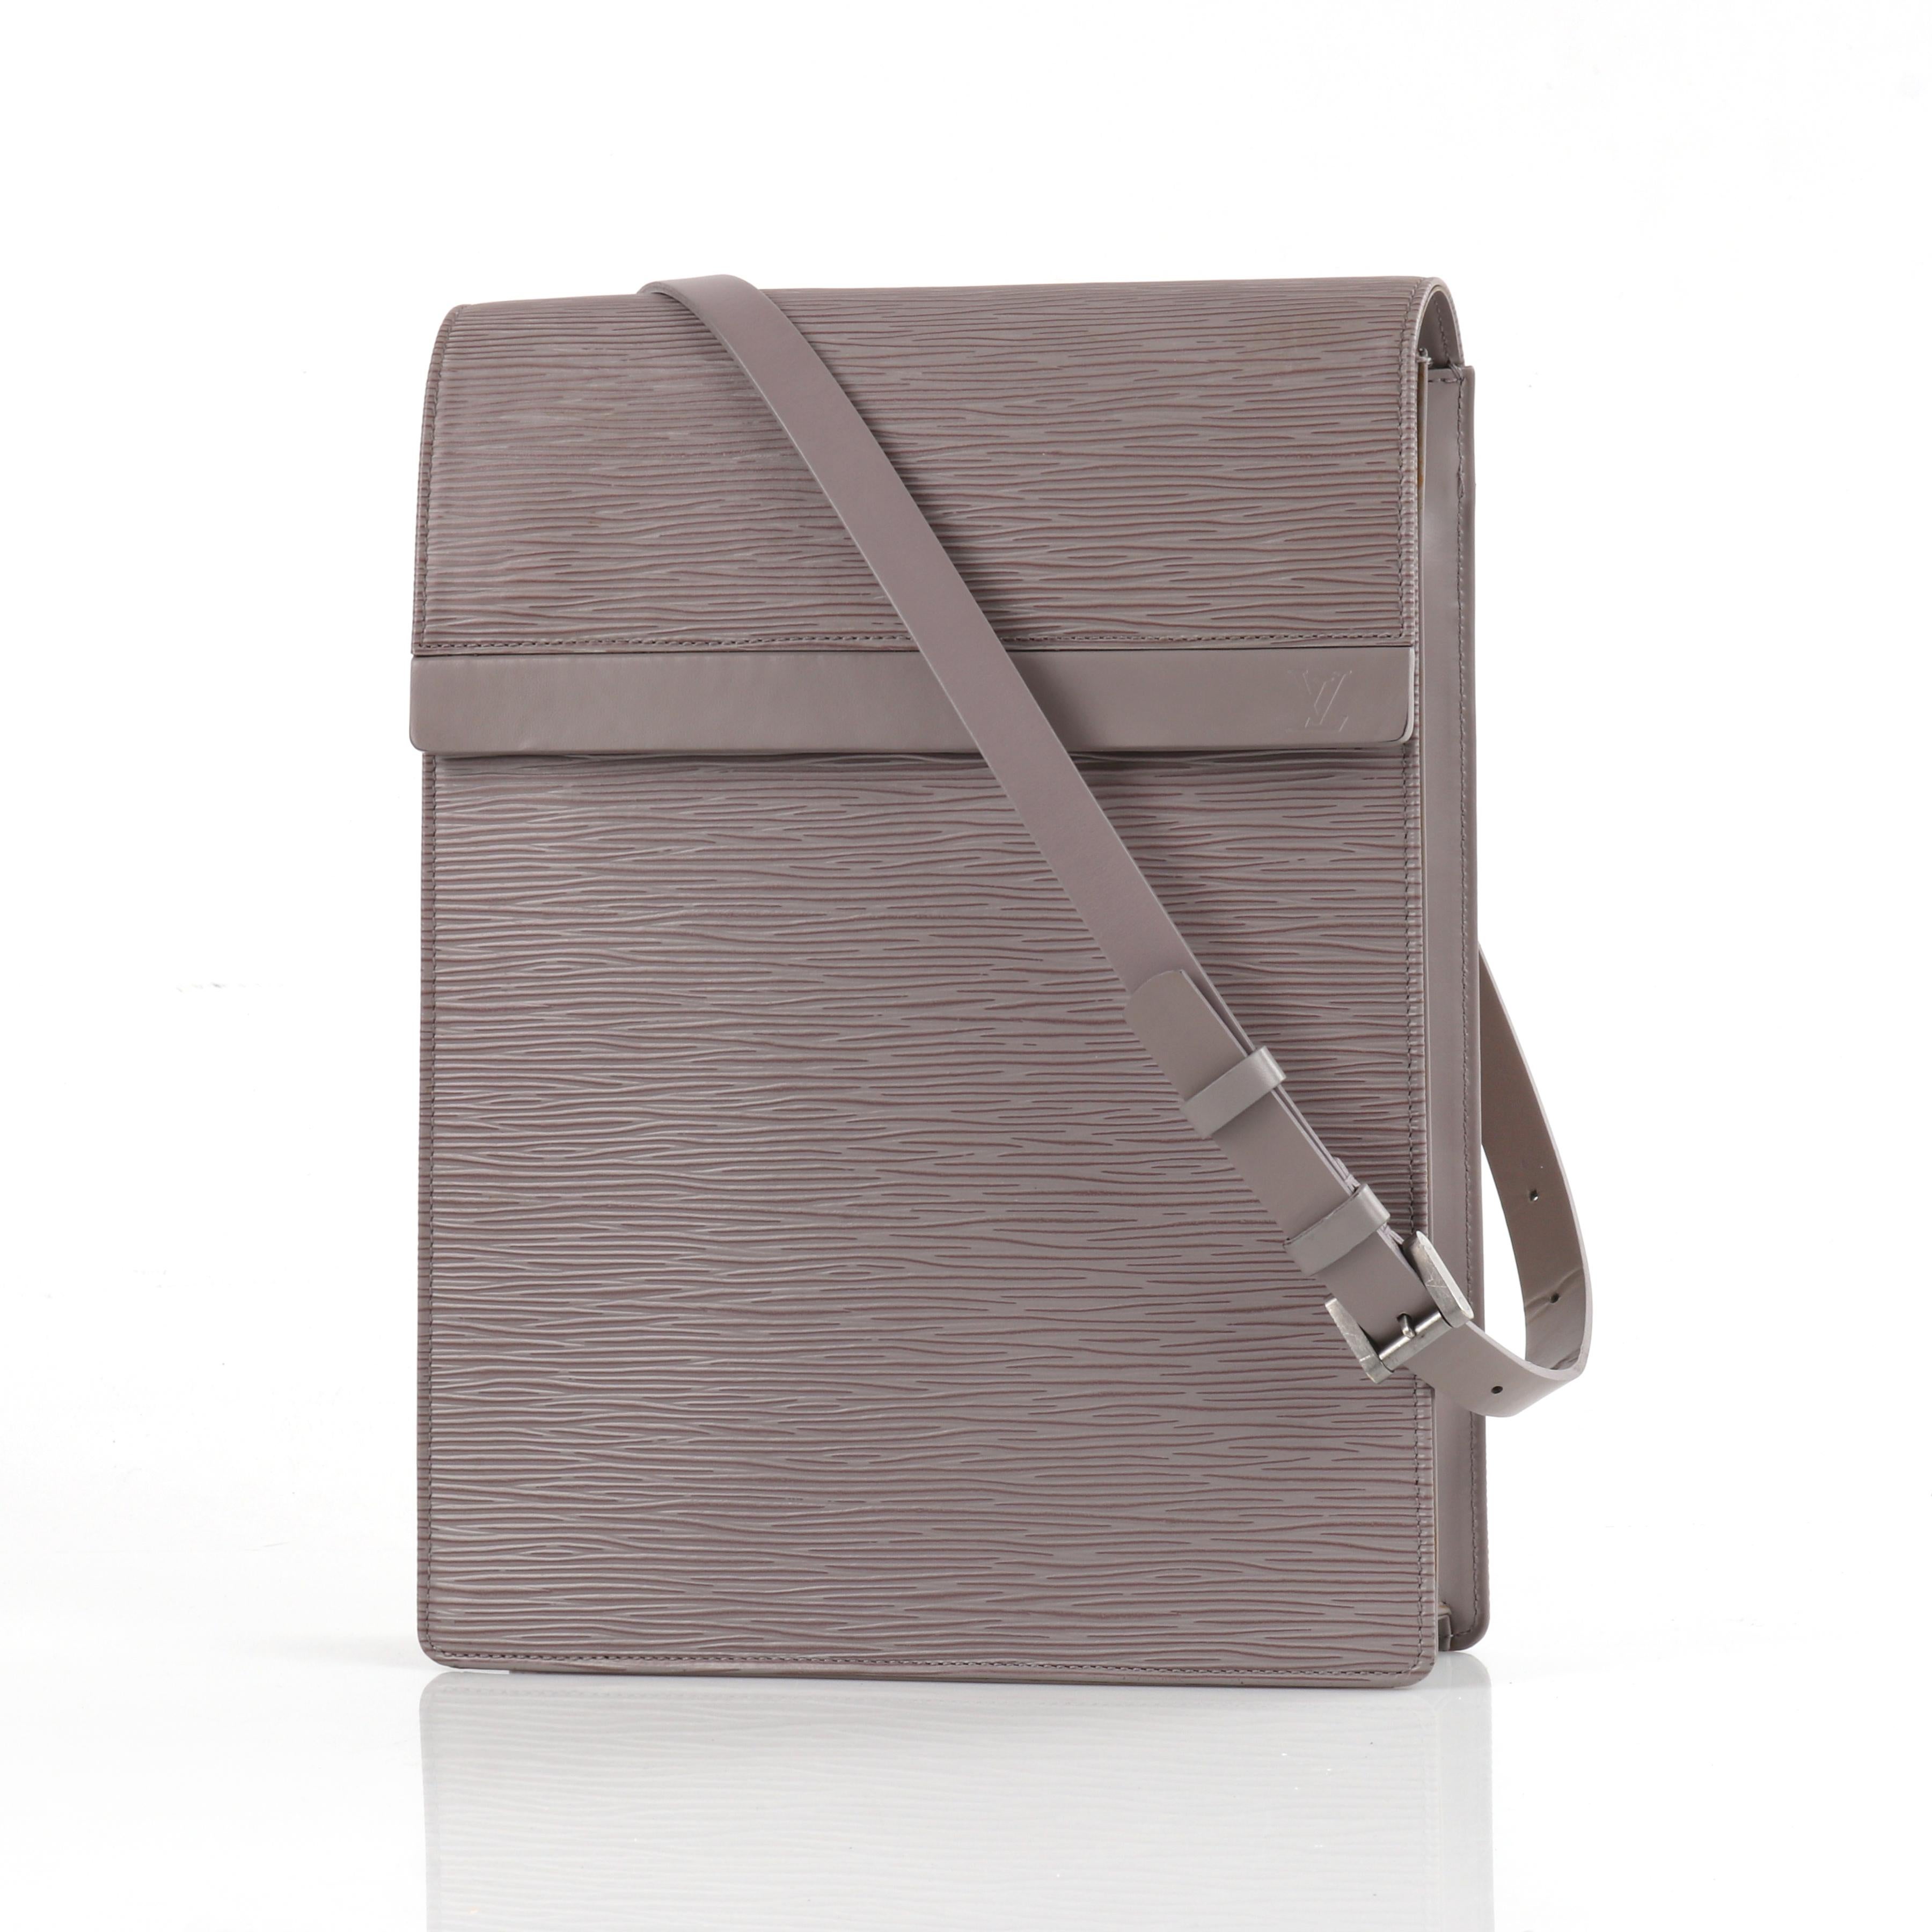 LOUIS VUITTON “Biarritz” Epi Cowhide Leather Fold Over Top Lilac Shoulder Bag Crossbody
 
Brand / Manufacturer: Louis Vuitton
Manufacturer Style Name: Biarritz bag
Style: Shoulder bag
Color(s): Shades of lilac purple
Lined: Yes
Unmarked Fabric